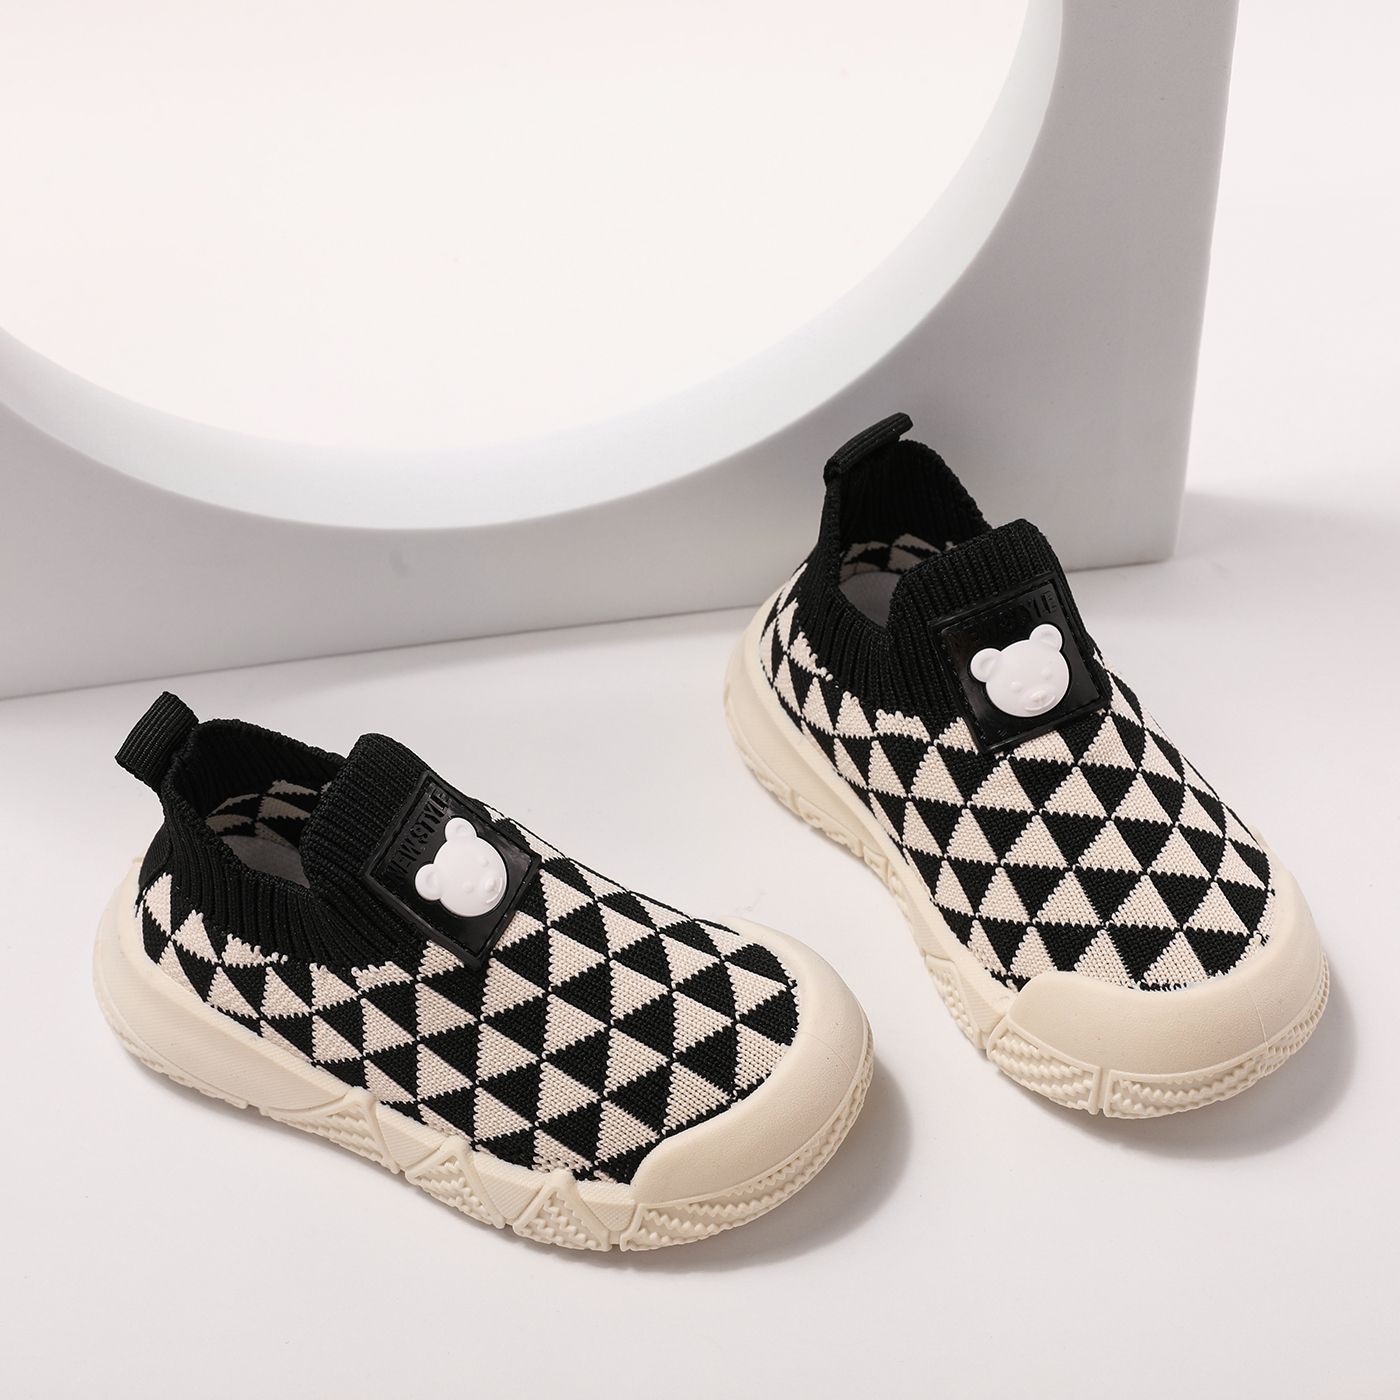 Toddlers & Kids Geometric Slip-on Casual Shoes